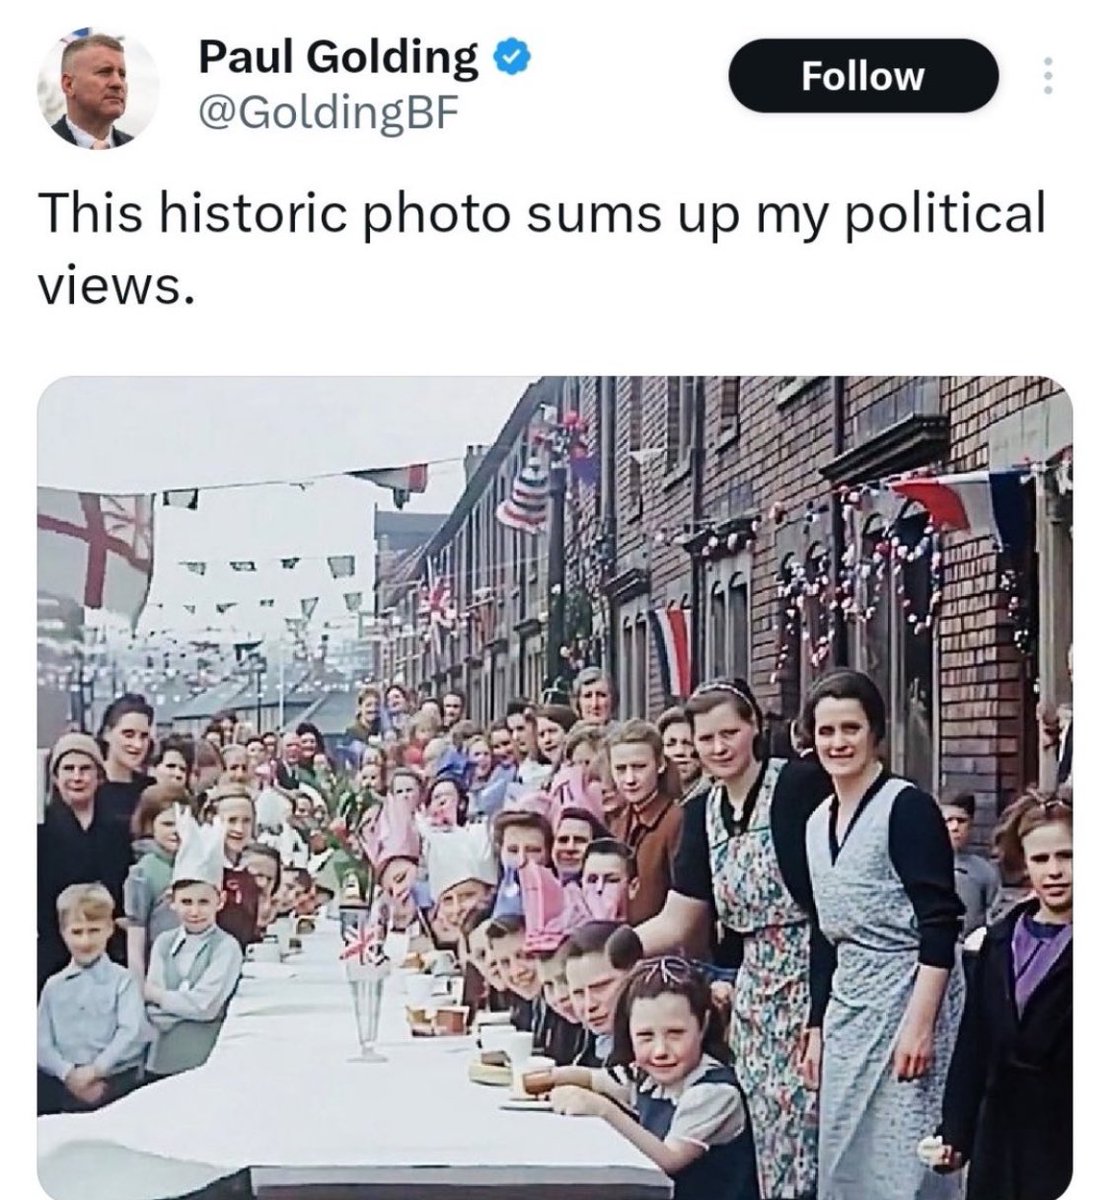 Only white people, women in aprons, gay people put in prison, higher infant mortality rate, rationing. Only he would have been on the losing side for this celebration.